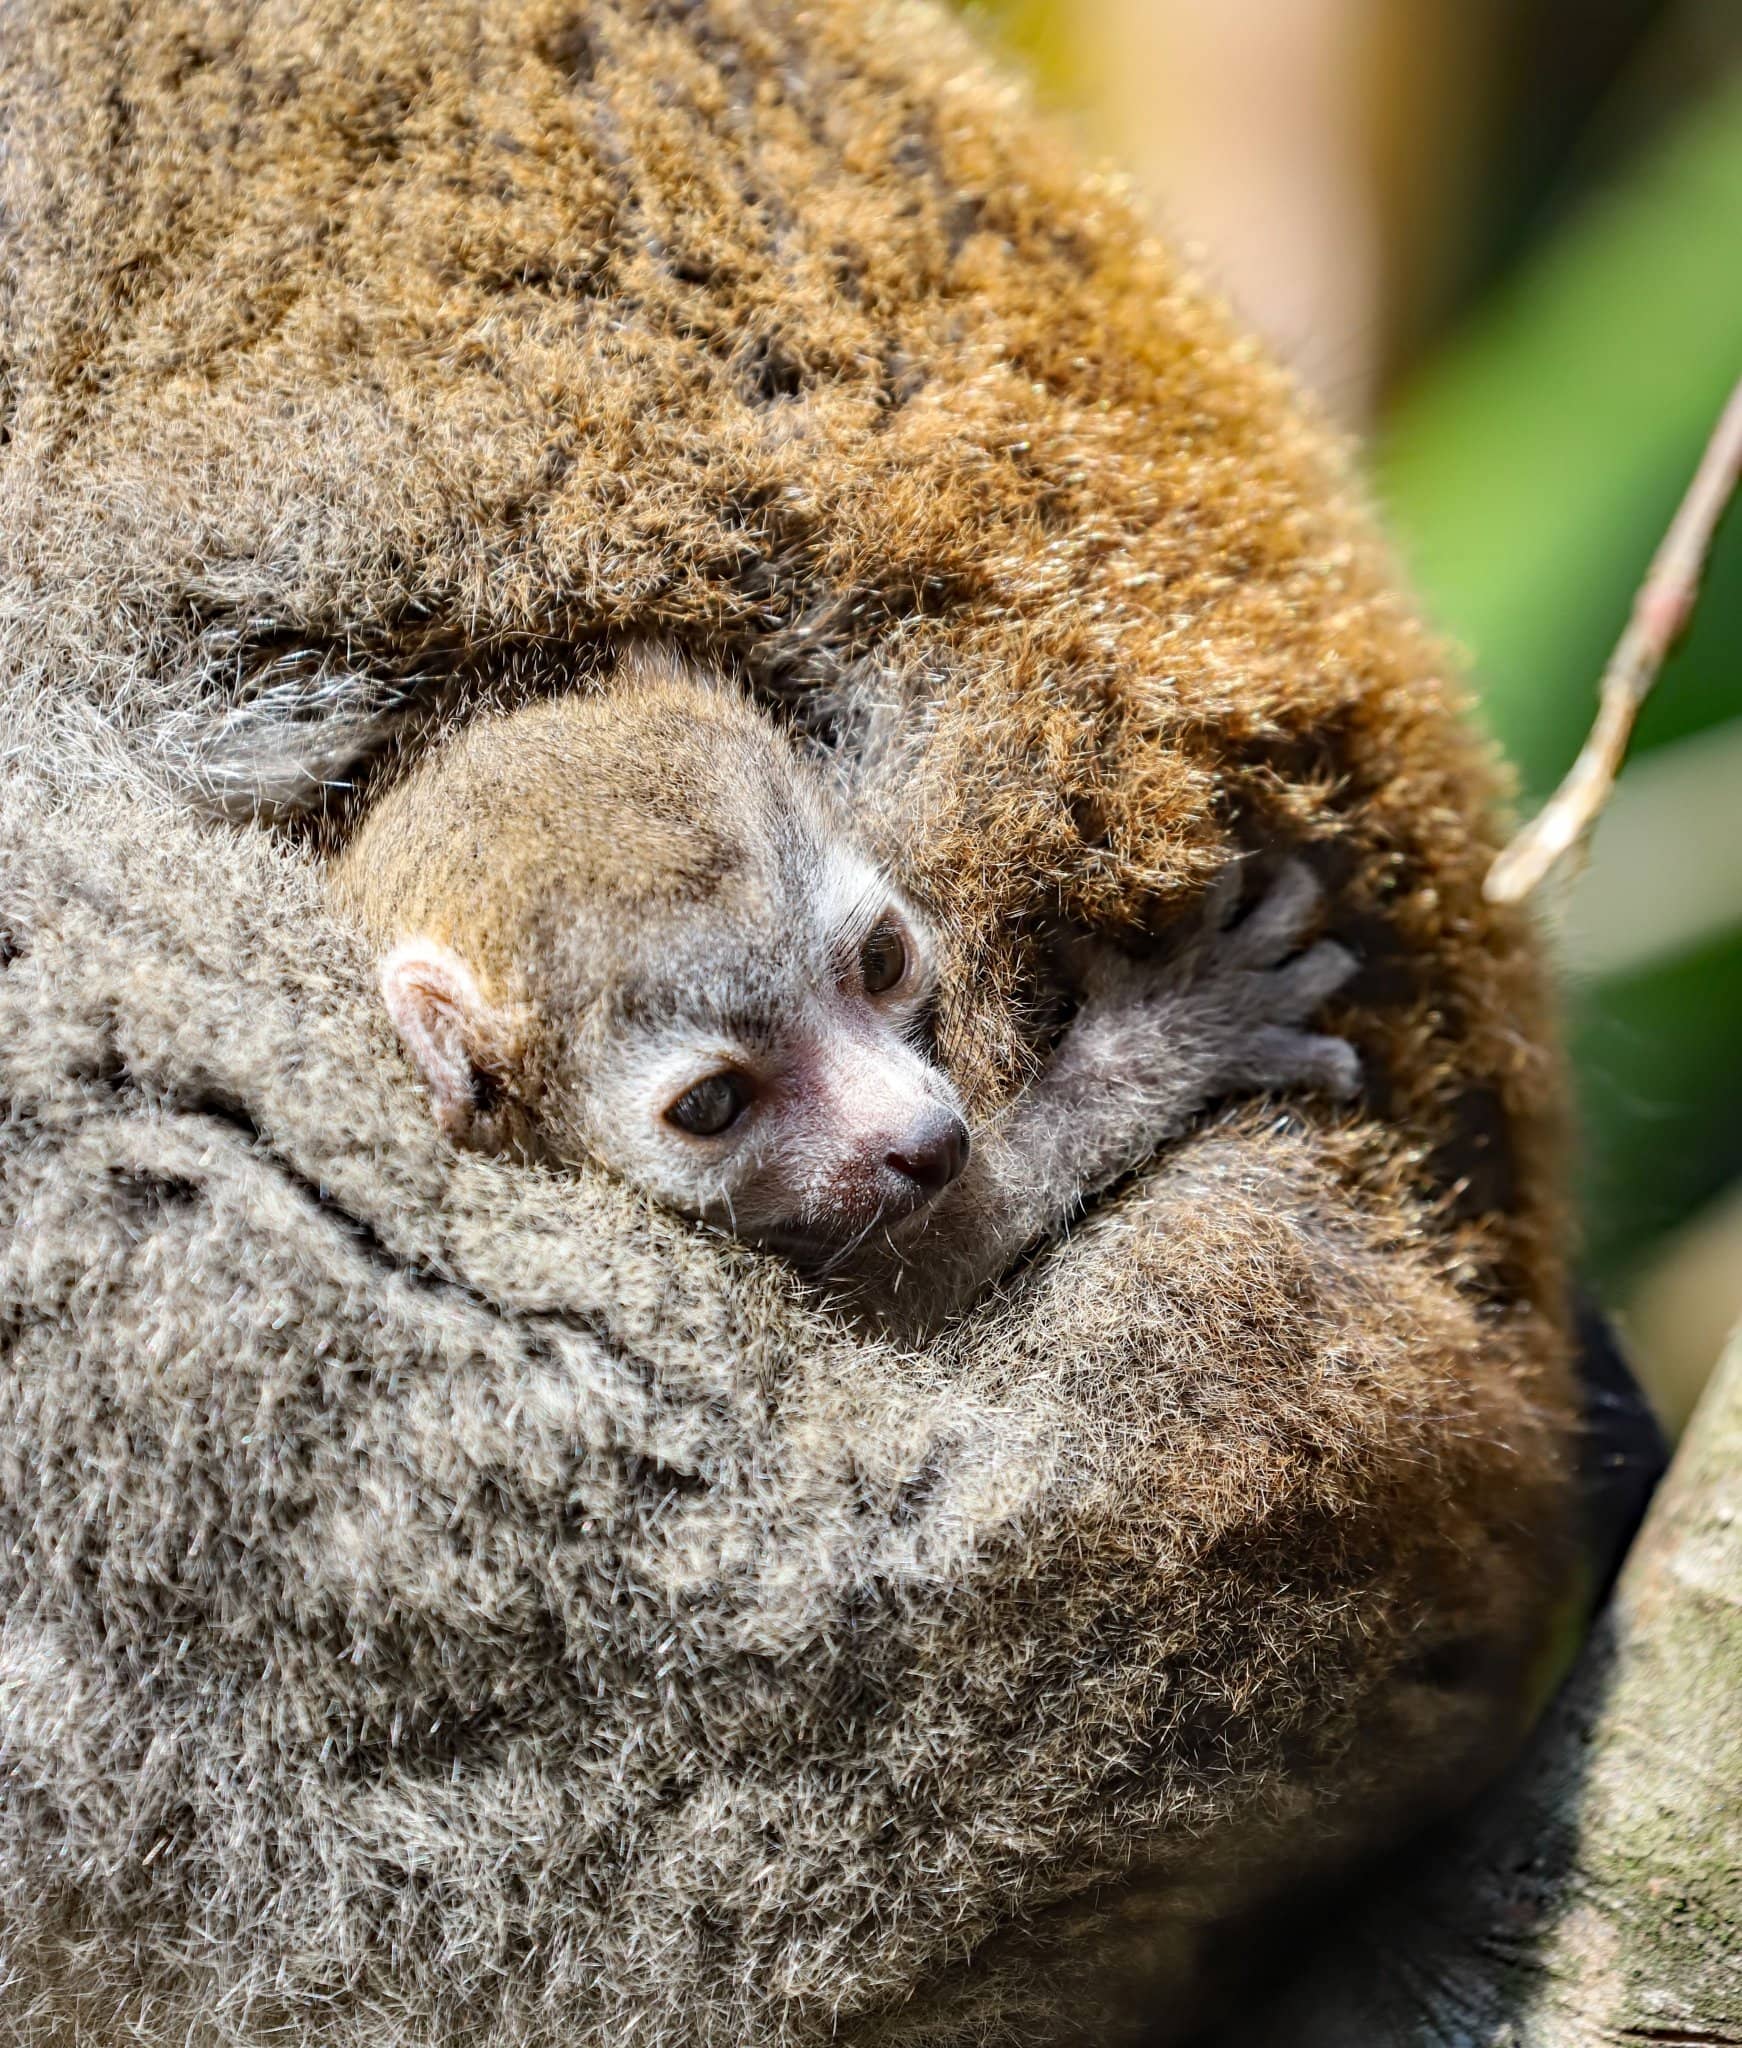 Newquay Zoo welcomes a rare crowned lemur baby